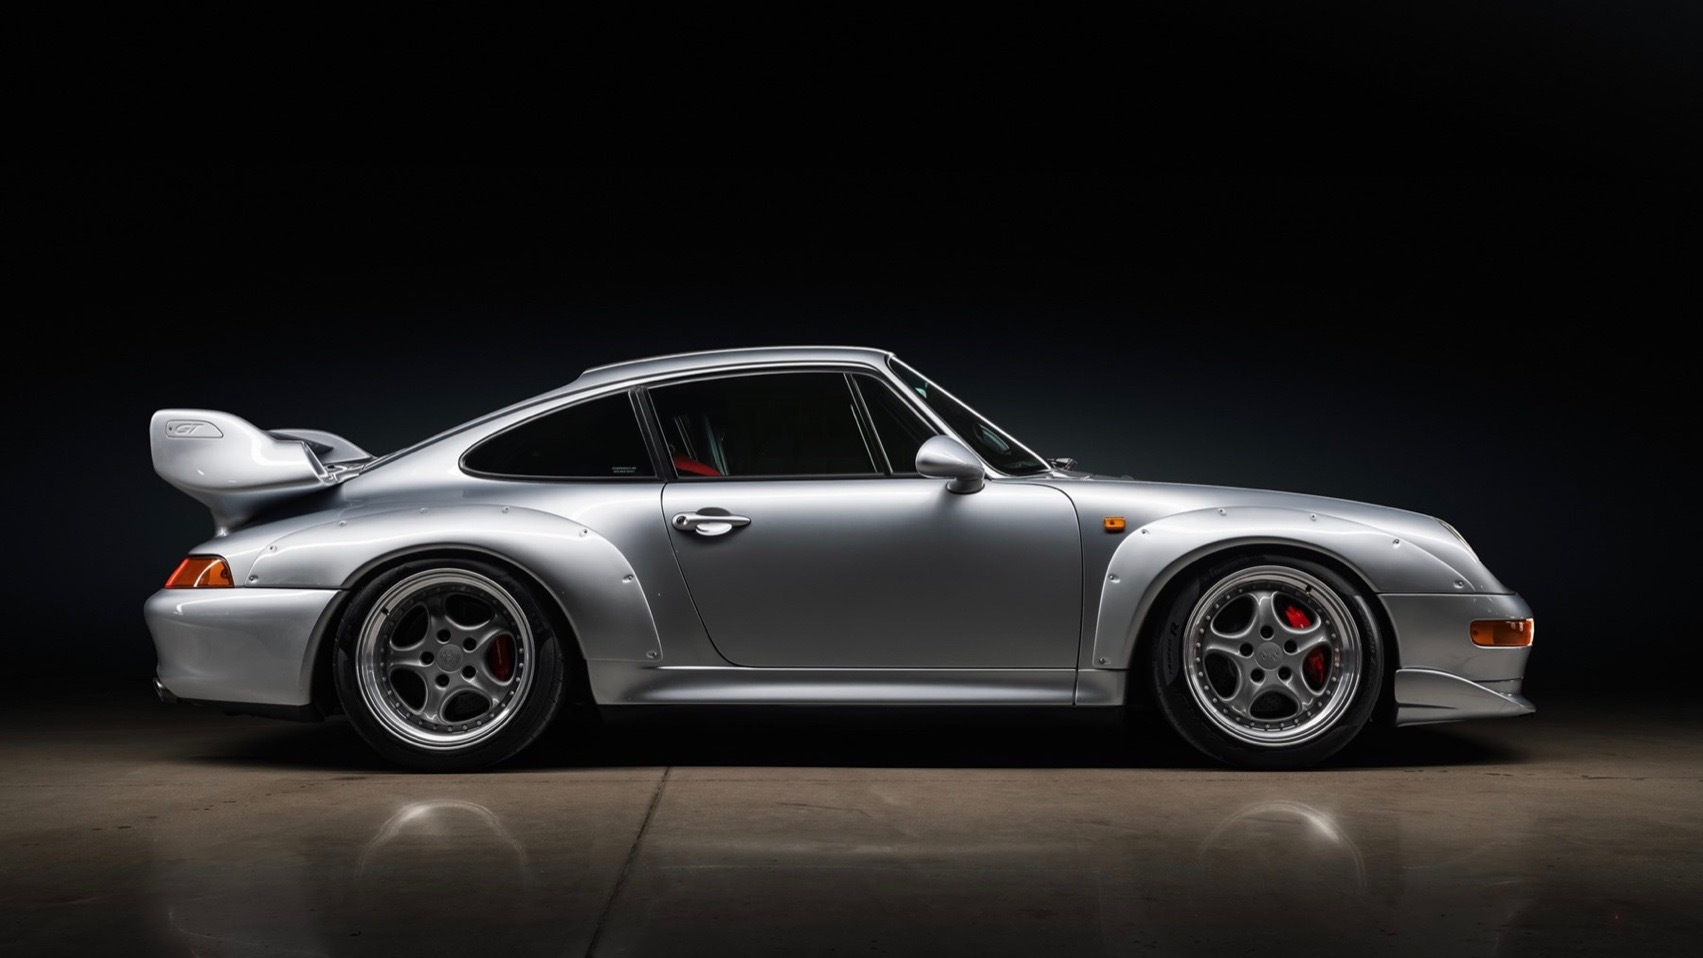 1996 Porsche 911 GT2 for sale (Photo by RM Sotheby's)